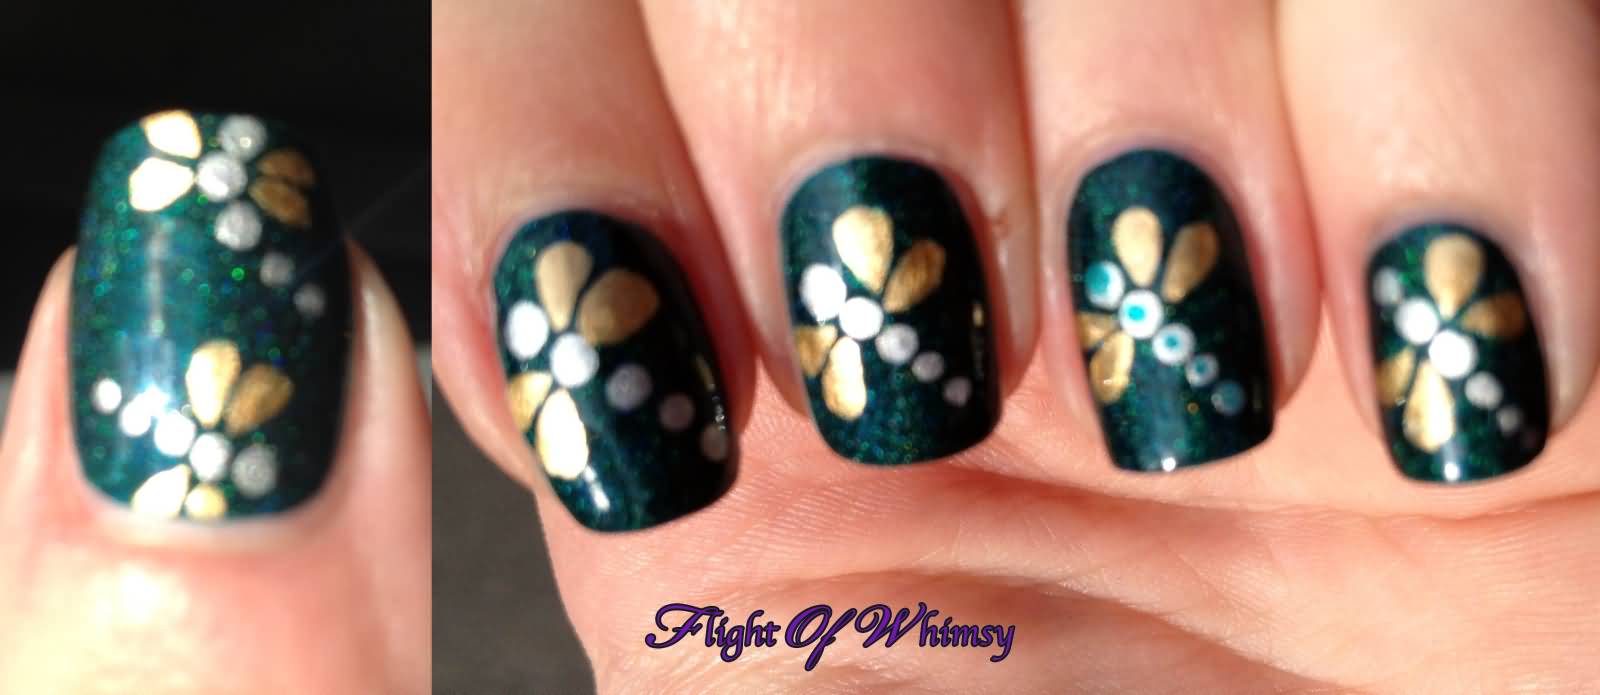 Dark Green Nails With Gold Leafs Design Nail Art